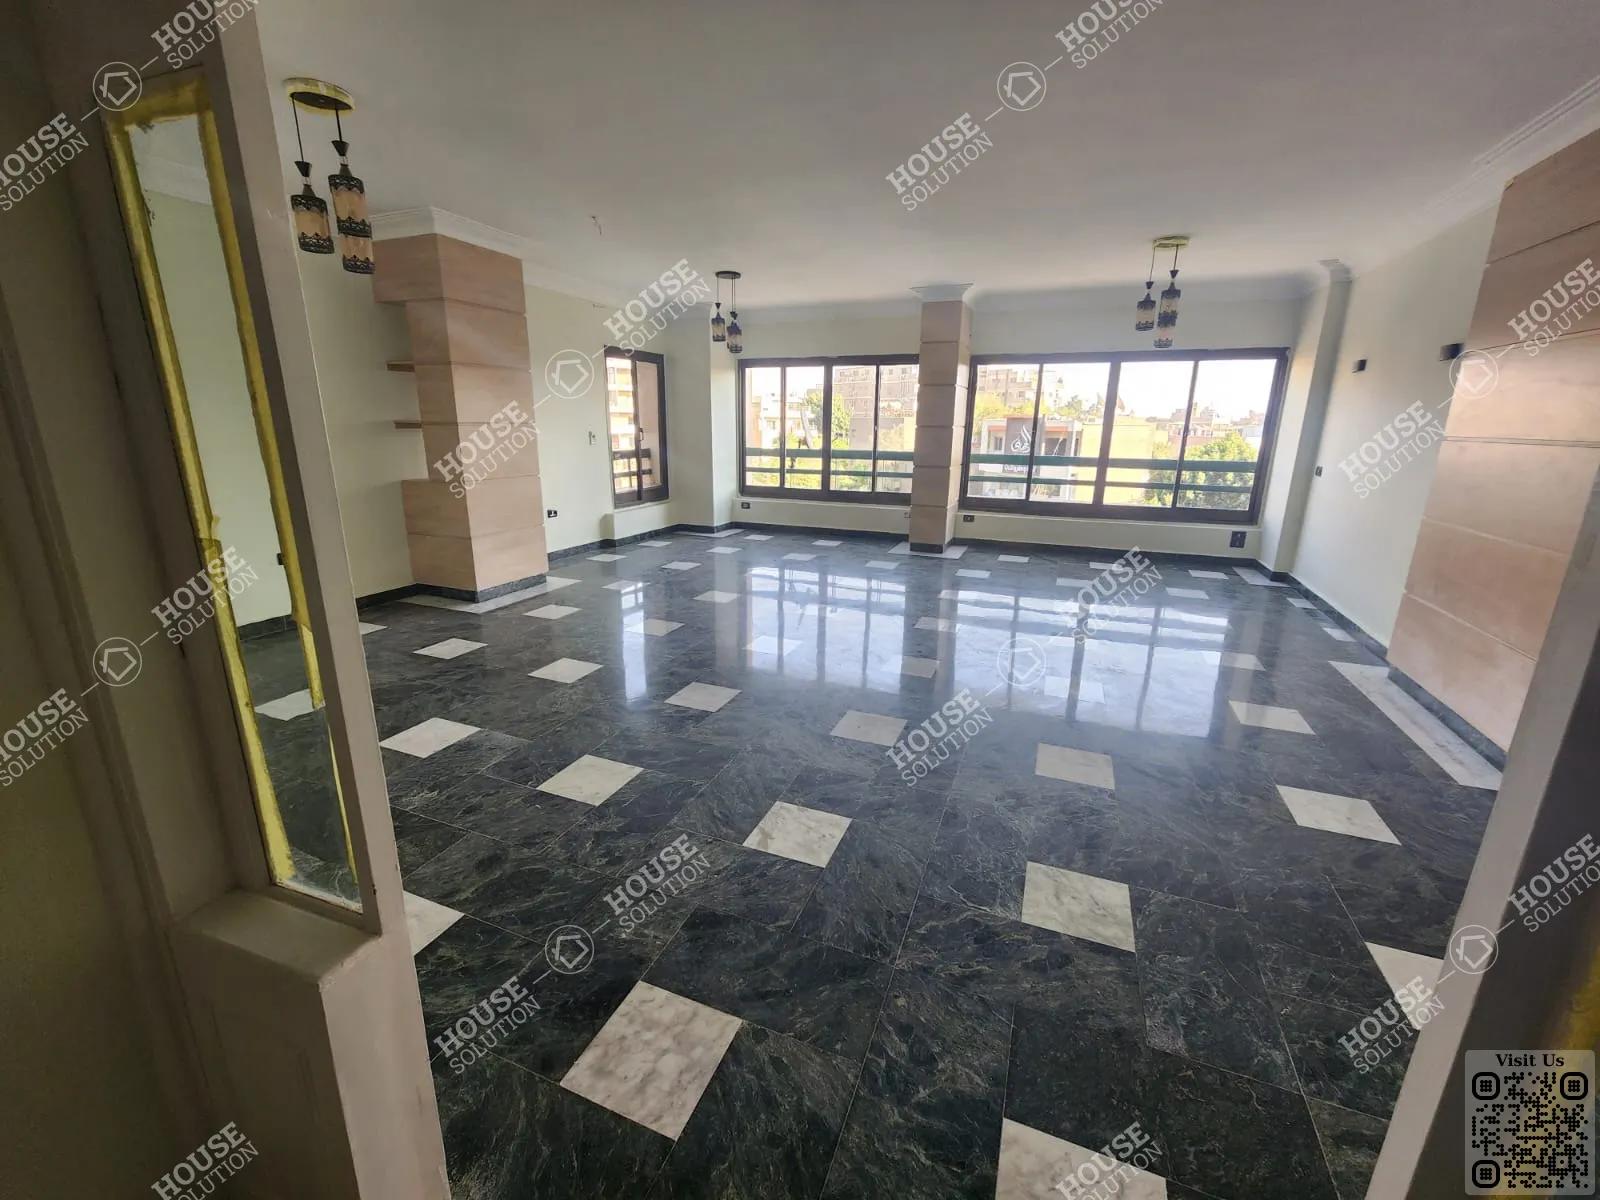 RECEPTION  @ Apartments For Rent In Maadi New Maadi Area: 175 m² consists of 3 Bedrooms 2 Bathrooms Semi furnished 5 stars #5776-1